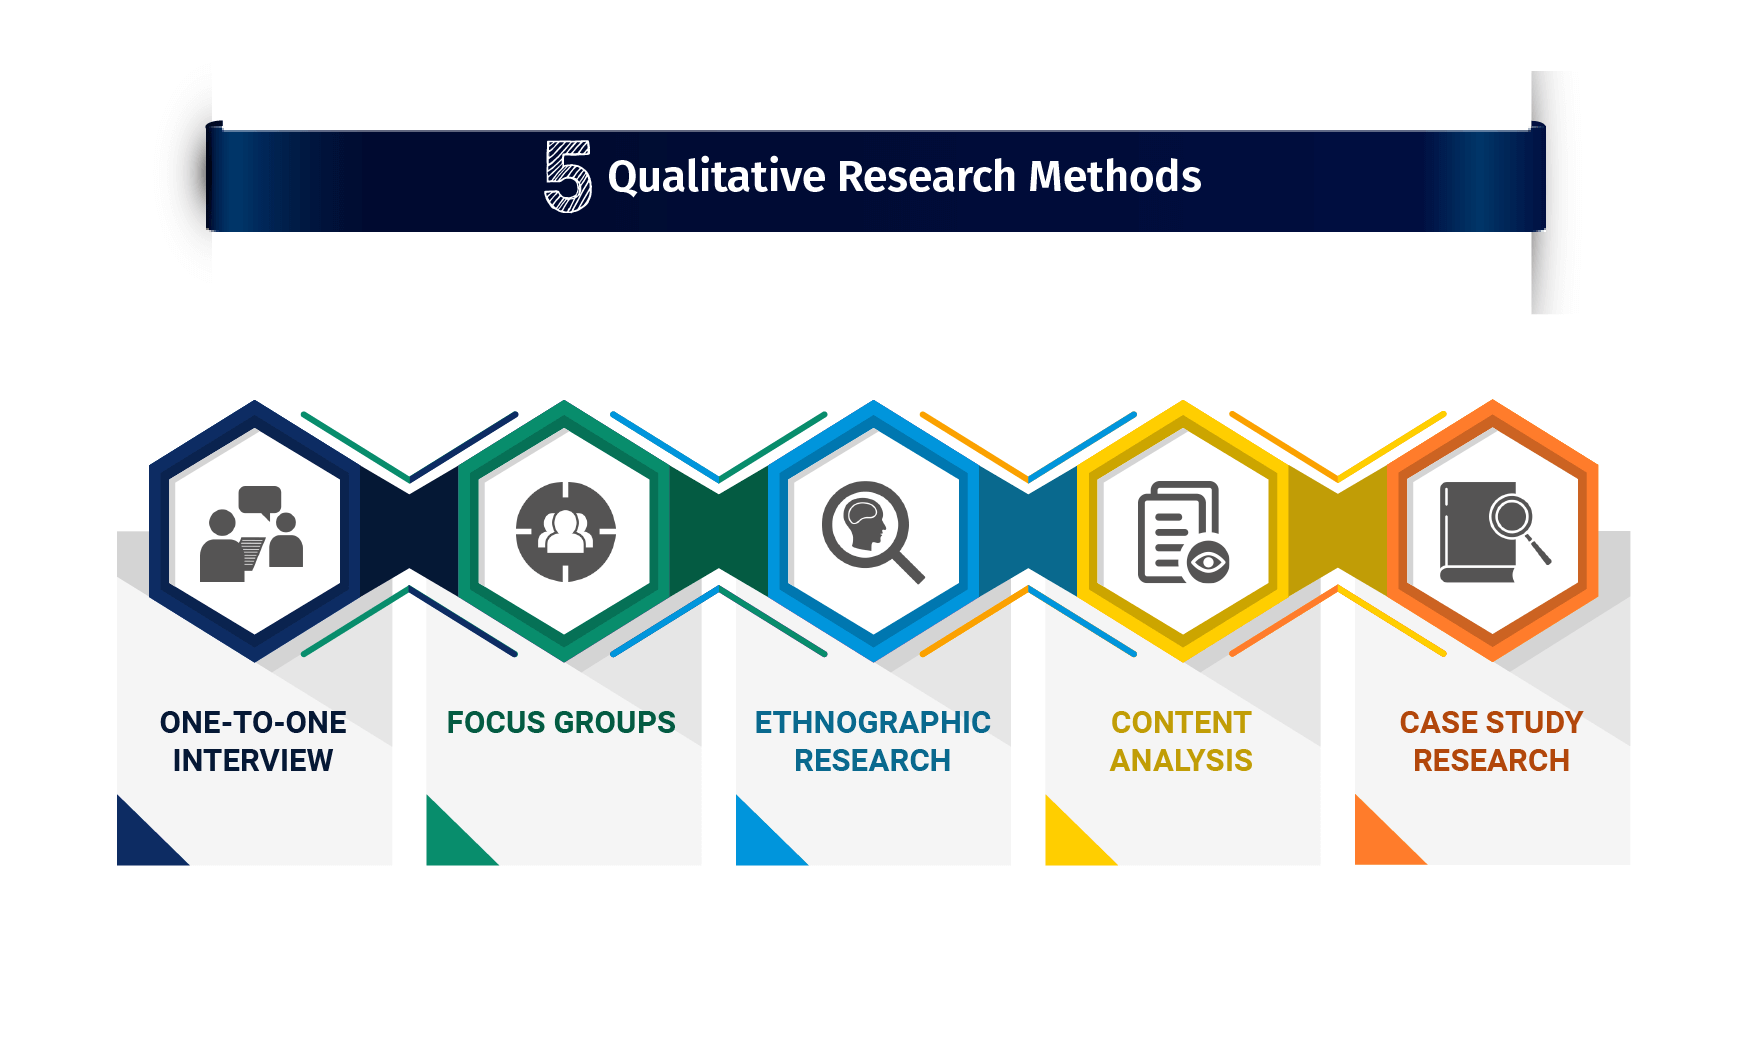 the methods used in qualitative research are